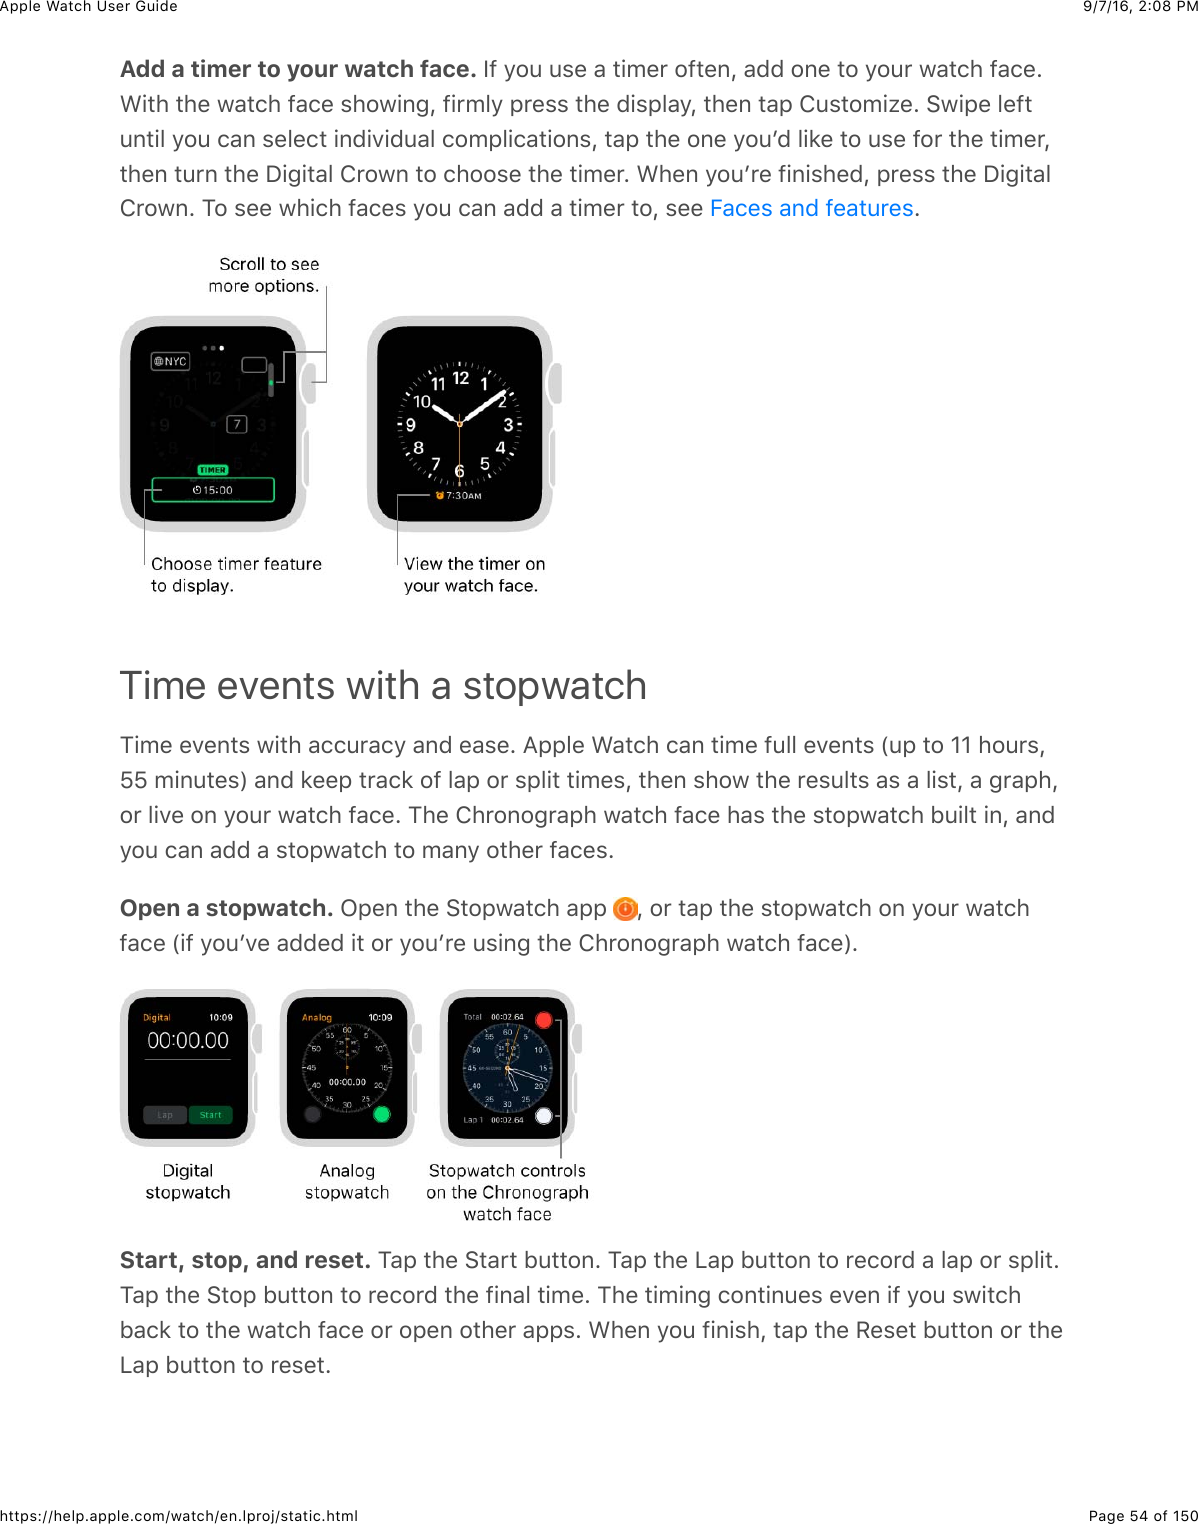 9/7/16, 2)08 PMApple Watch User GuidePage 54 of 150https://help.apple.com/watch/en.lproj/static.htmlAdd a timer to your watch face. Y@&amp;/#4&amp;4$%&amp;&apos;&amp;3+5%*&amp;#@3%,J&amp;&apos;00&amp;#,%&amp;3#&amp;/#4*&amp;7&apos;3()&amp;@&apos;(%C&gt;+3)&amp;3)%&amp;7&apos;3()&amp;@&apos;(%&amp;$)#7+,-J&amp;@+*5&quot;/&amp;2*%$$&amp;3)%&amp;0+$2&quot;&apos;/J&amp;3)%,&amp;3&apos;2&amp;!4$3#5+N%C&amp;67+2%&amp;&quot;%@34,3+&quot;&amp;/#4&amp;(&apos;,&amp;$%&quot;%(3&amp;+,0+.+04&apos;&quot;&amp;(#52&quot;+(&apos;3+#,$J&amp;3&apos;2&amp;3)%&amp;#,%&amp;/#4W0&amp;&quot;+8%&amp;3#&amp;4$%&amp;@#*&amp;3)%&amp;3+5%*J3)%,&amp;34*,&amp;3)%&amp;I+-+3&apos;&quot;&amp;!*#7,&amp;3#&amp;()##$%&amp;3)%&amp;3+5%*C&amp;&gt;)%,&amp;/#4W*%&amp;@+,+$)%0J&amp;2*%$$&amp;3)%&amp;I+-+3&apos;&quot;!*#7,C&amp;1#&amp;$%%&amp;7)+()&amp;@&apos;(%$&amp;/#4&amp;(&apos;,&amp;&apos;00&amp;&apos;&amp;3+5%*&amp;3#J&amp;$%%&amp; CTime events with a stopwatch1+5%&amp;%.%,3$&amp;7+3)&amp;&apos;((4*&apos;(/&amp;&apos;,0&amp;%&apos;$%C&amp;=22&quot;%&amp;&gt;&apos;3()&amp;(&apos;,&amp;3+5%&amp;@4&quot;&quot;&amp;%.%,3$&amp;P42&amp;3#&amp;]]&amp;)#4*$J\\&amp;5+,43%$R&amp;&apos;,0&amp;8%%2&amp;3*&apos;(8&amp;#@&amp;&quot;&apos;2&amp;#*&amp;$2&quot;+3&amp;3+5%$J&amp;3)%,&amp;$)#7&amp;3)%&amp;*%$4&quot;3$&amp;&apos;$&amp;&apos;&amp;&quot;+$3J&amp;&apos;&amp;-*&apos;2)J#*&amp;&quot;+.%&amp;#,&amp;/#4*&amp;7&apos;3()&amp;@&apos;(%C&amp;1)%&amp;!)*#,#-*&apos;2)&amp;7&apos;3()&amp;@&apos;(%&amp;)&apos;$&amp;3)%&amp;$3#27&apos;3()&amp;B4+&quot;3&amp;+,J&amp;&apos;,0/#4&amp;(&apos;,&amp;&apos;00&amp;&apos;&amp;$3#27&apos;3()&amp;3#&amp;5&apos;,/&amp;#3)%*&amp;@&apos;(%$COpen a stopwatch. L2%,&amp;3)%&amp;63#27&apos;3()&amp;&apos;22&amp; J&amp;#*&amp;3&apos;2&amp;3)%&amp;$3#27&apos;3()&amp;#,&amp;/#4*&amp;7&apos;3()@&apos;(%&amp;P+@&amp;/#4W.%&amp;&apos;00%0&amp;+3&amp;#*&amp;/#4W*%&amp;4$+,-&amp;3)%&amp;!)*#,#-*&apos;2)&amp;7&apos;3()&amp;@&apos;(%RCStart, stop, and reset. 1&apos;2&amp;3)%&amp;63&apos;*3&amp;B433#,C&amp;1&apos;2&amp;3)%&amp;&lt;&apos;2&amp;B433#,&amp;3#&amp;*%(#*0&amp;&apos;&amp;&quot;&apos;2&amp;#*&amp;$2&quot;+3C1&apos;2&amp;3)%&amp;63#2&amp;B433#,&amp;3#&amp;*%(#*0&amp;3)%&amp;@+,&apos;&quot;&amp;3+5%C&amp;1)%&amp;3+5+,-&amp;(#,3+,4%$&amp;%.%,&amp;+@&amp;/#4&amp;$7+3()B&apos;(8&amp;3#&amp;3)%&amp;7&apos;3()&amp;@&apos;(%&amp;#*&amp;#2%,&amp;#3)%*&amp;&apos;22$C&amp;&gt;)%,&amp;/#4&amp;@+,+$)J&amp;3&apos;2&amp;3)%&amp;H%$%3&amp;B433#,&amp;#*&amp;3)%&lt;&apos;2&amp;B433#,&amp;3#&amp;*%$%3CE&apos;(%$&amp;&apos;,0&amp;@%&apos;34*%$